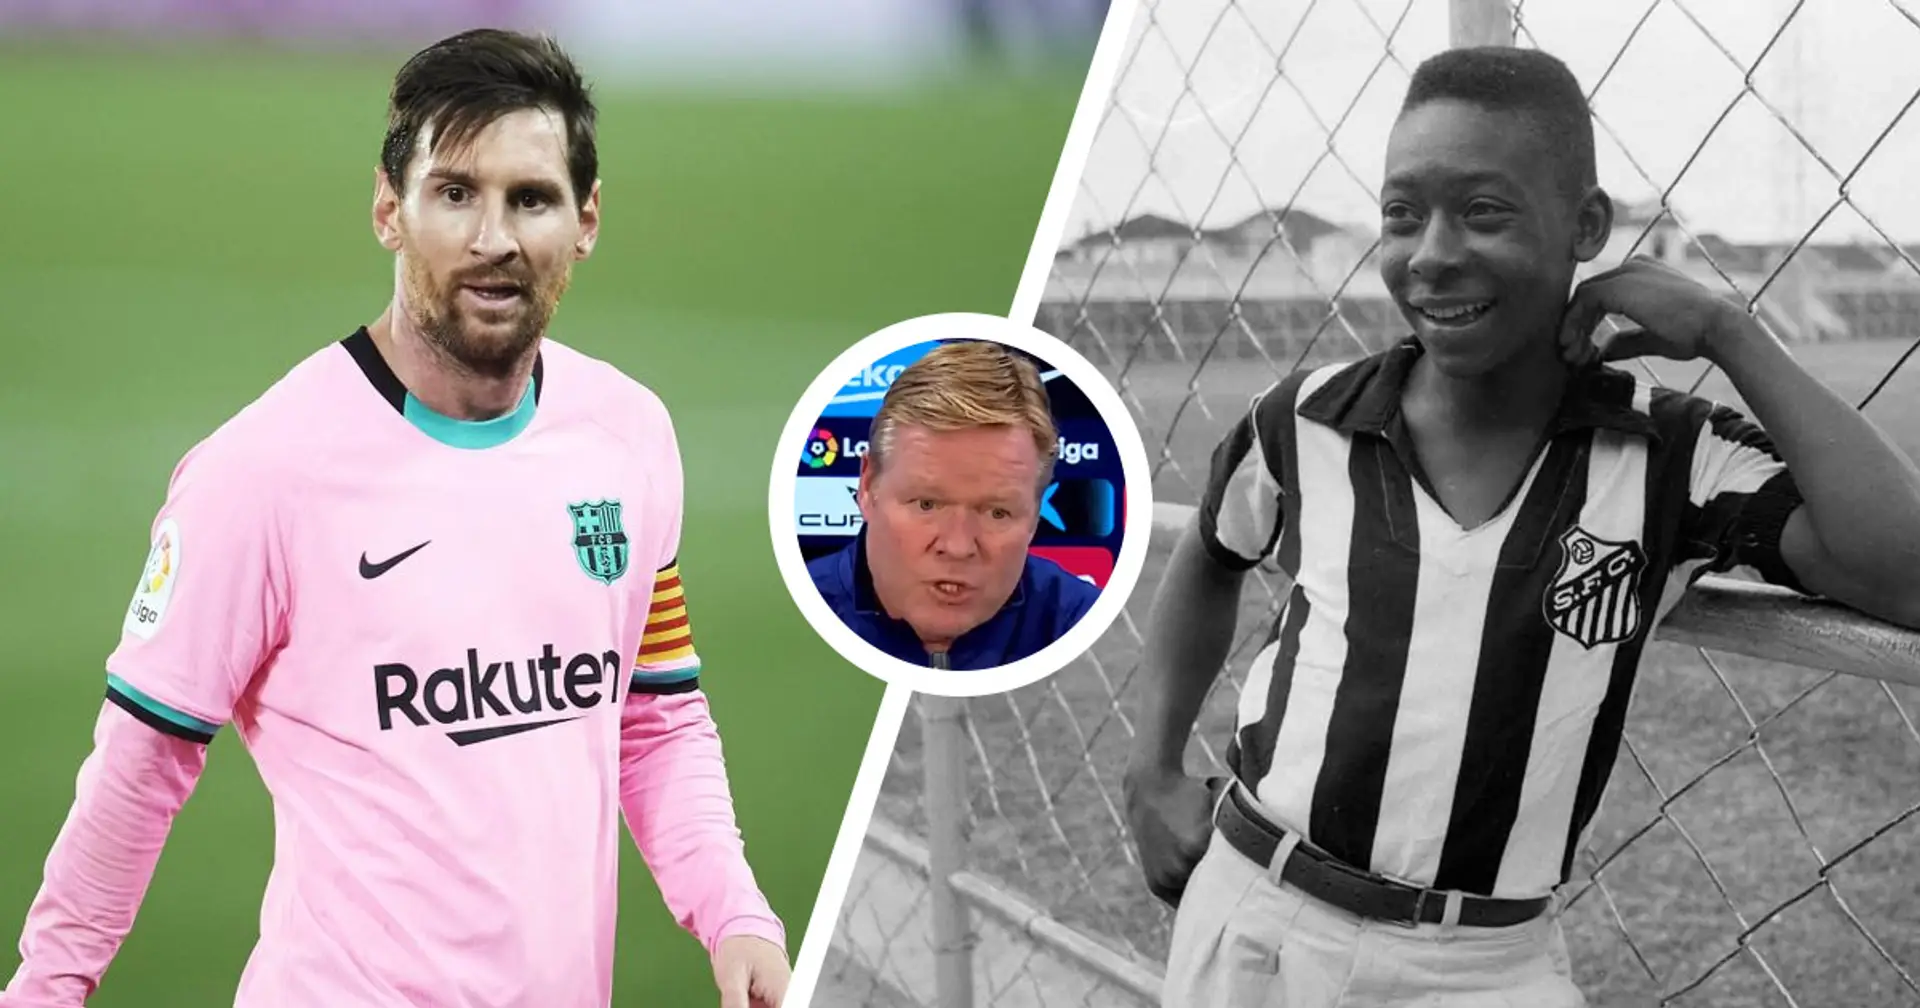 'The numbers are impressive': Koeman reacts to Messi being 1 goal away from equalling unbelievable record